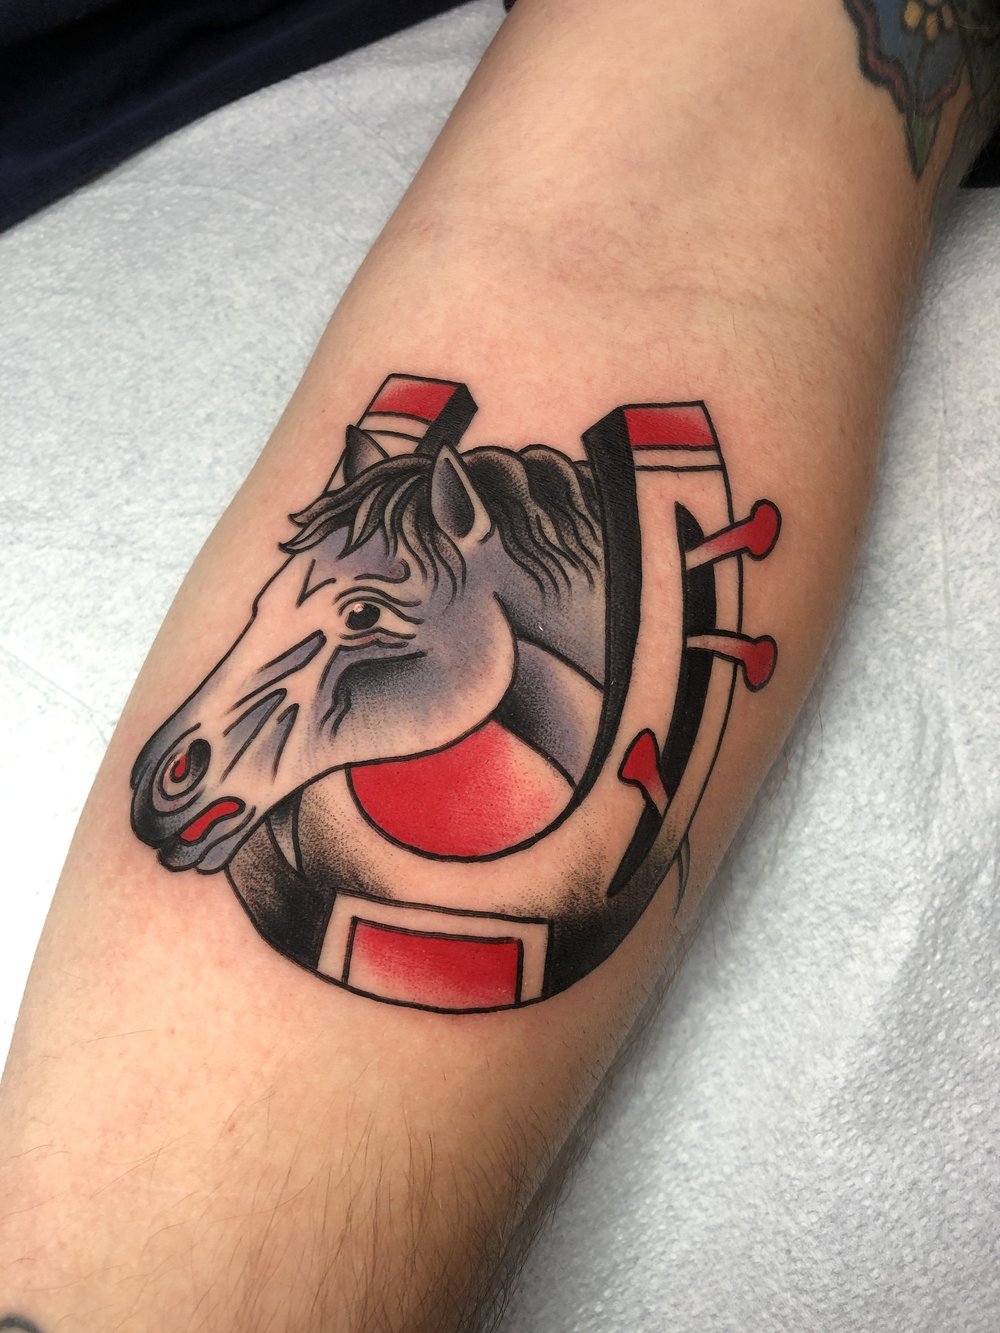 Horseshoe Tattoo Meaning: Decoding the Hidden Meanings of Tattoos